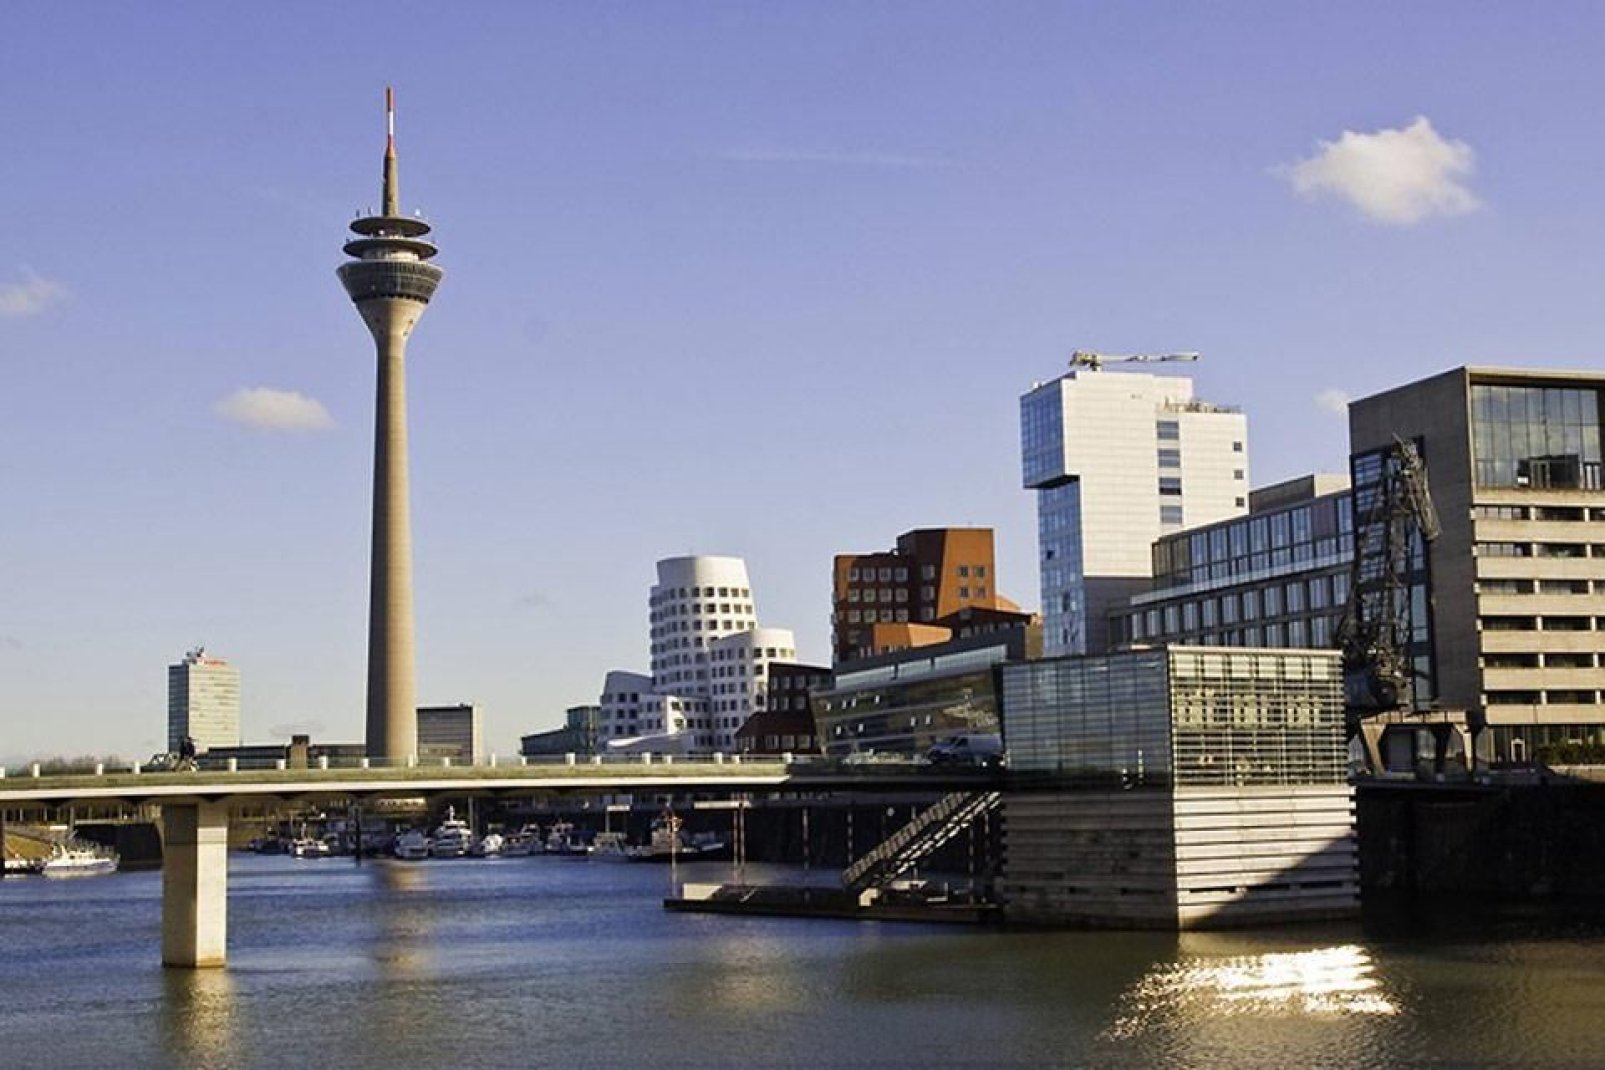 Like Cologne, Düsseldorf is located on the banks of the Rhine.